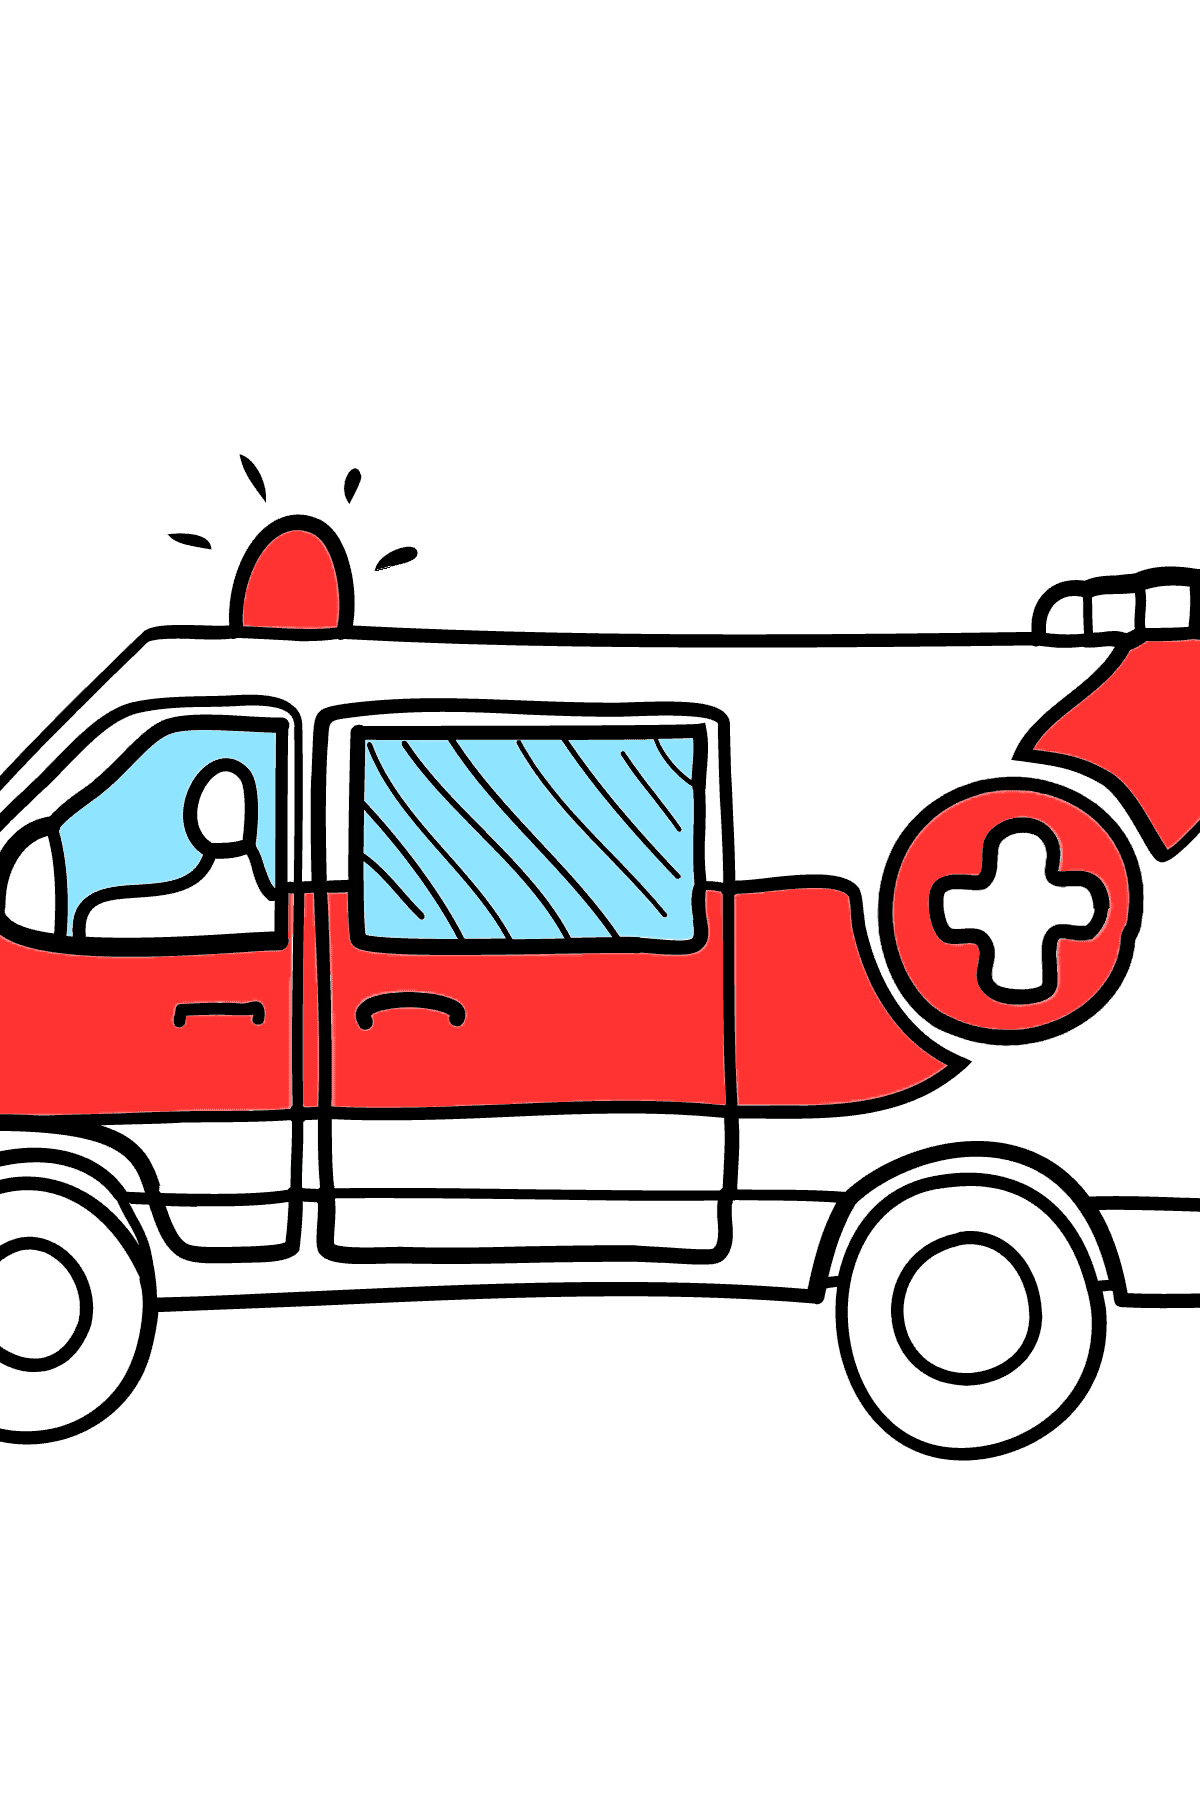 Coloring Page - An Ambulance for Kids 